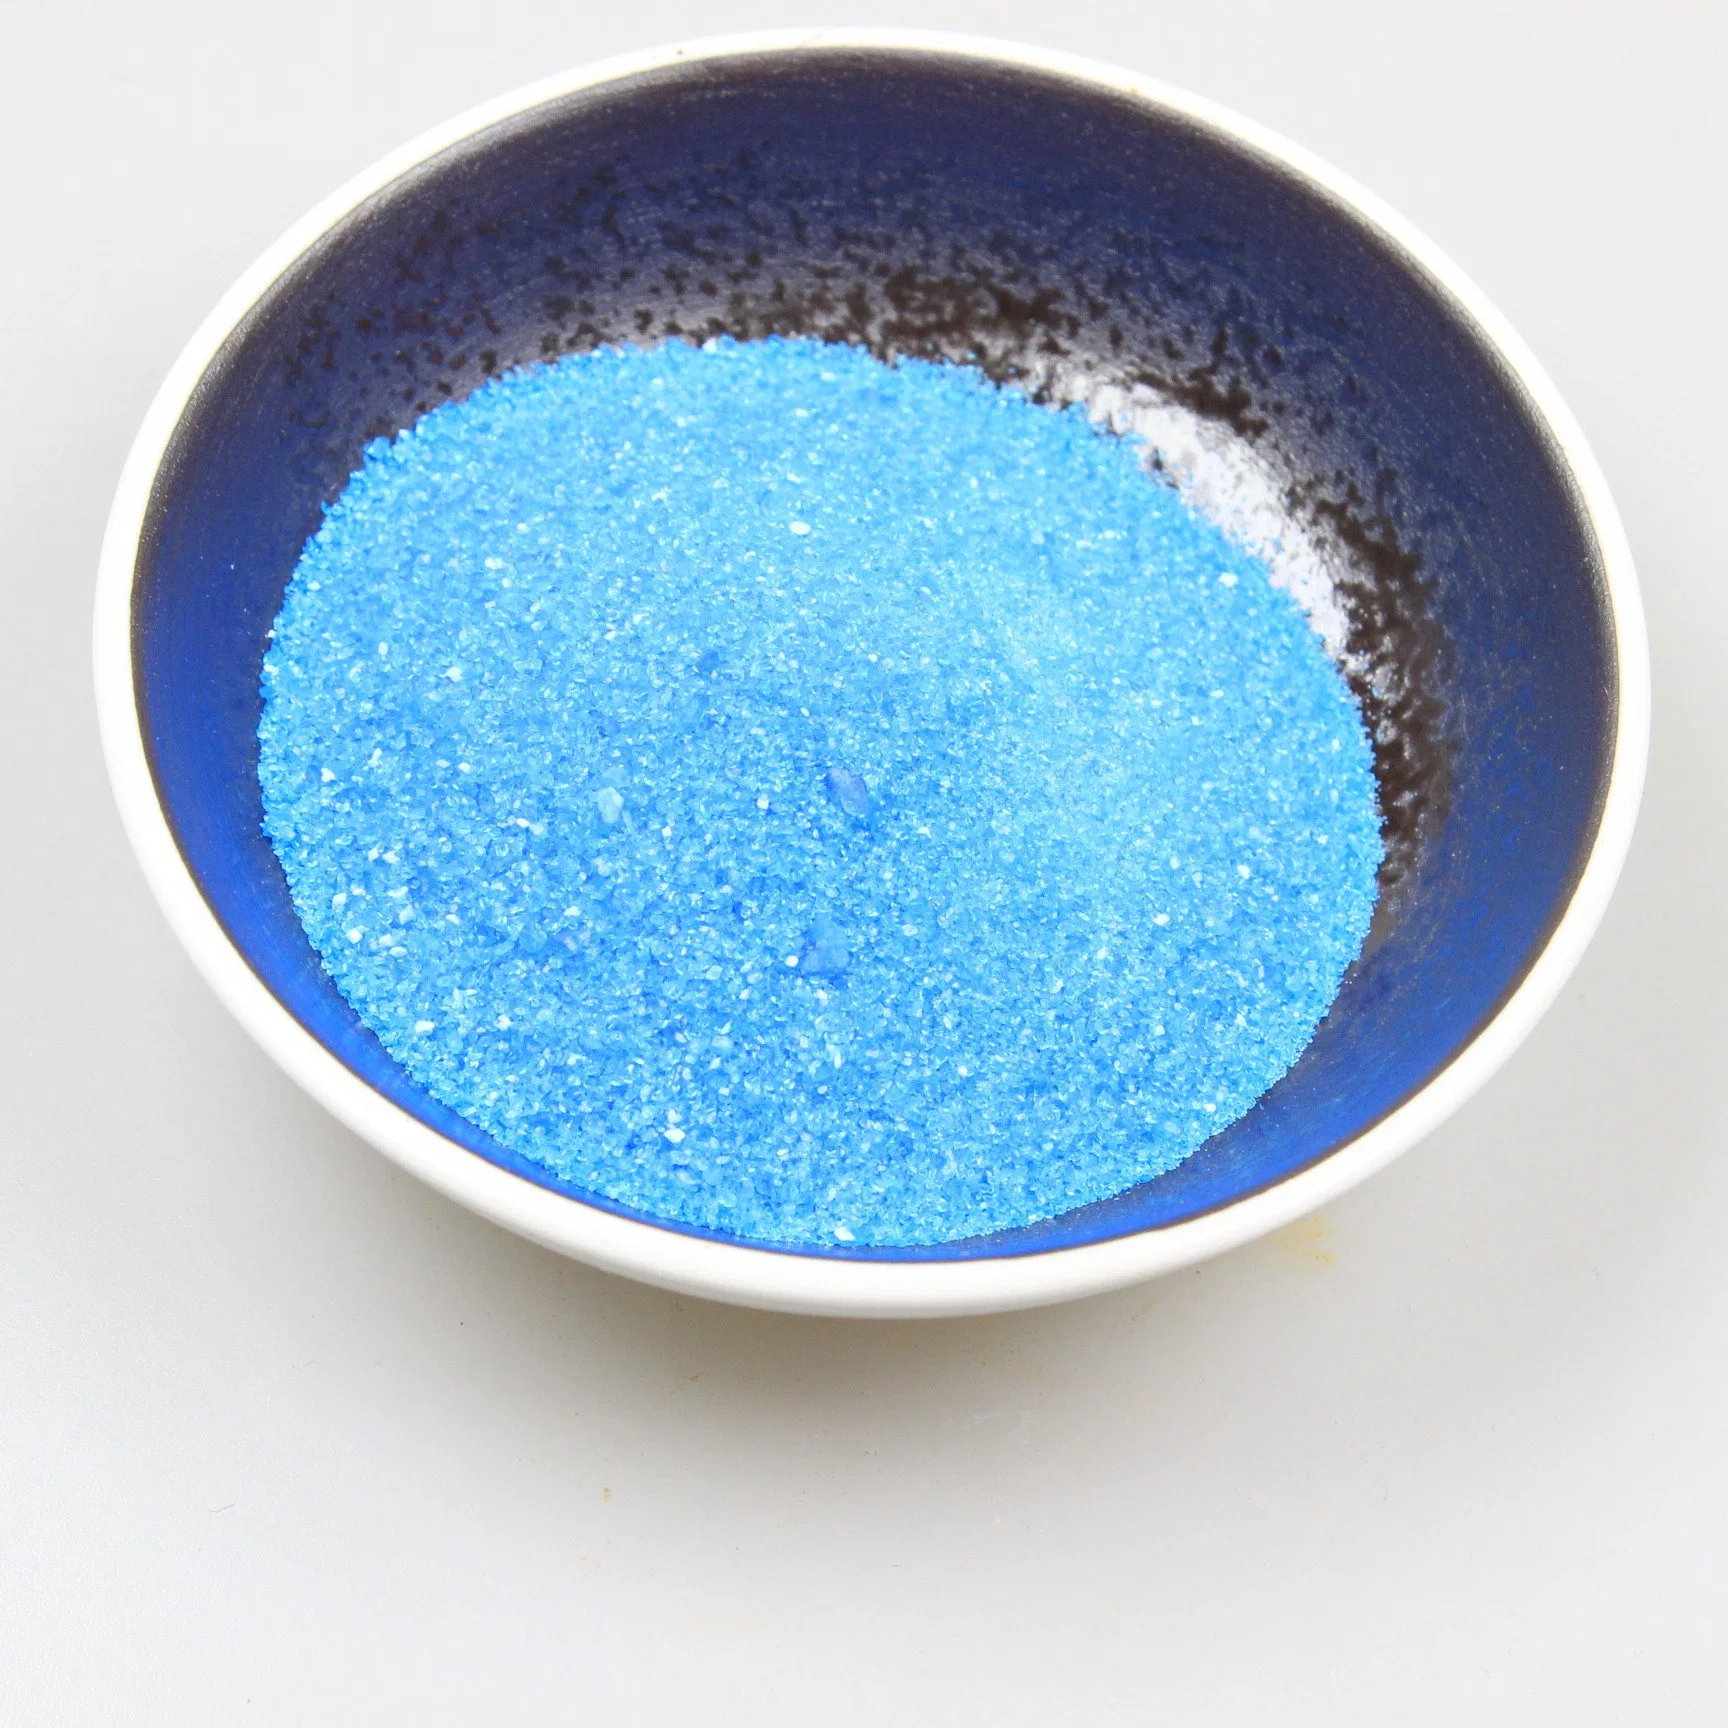 98% Copper Sulfate for Tanning and Copper Electroplating